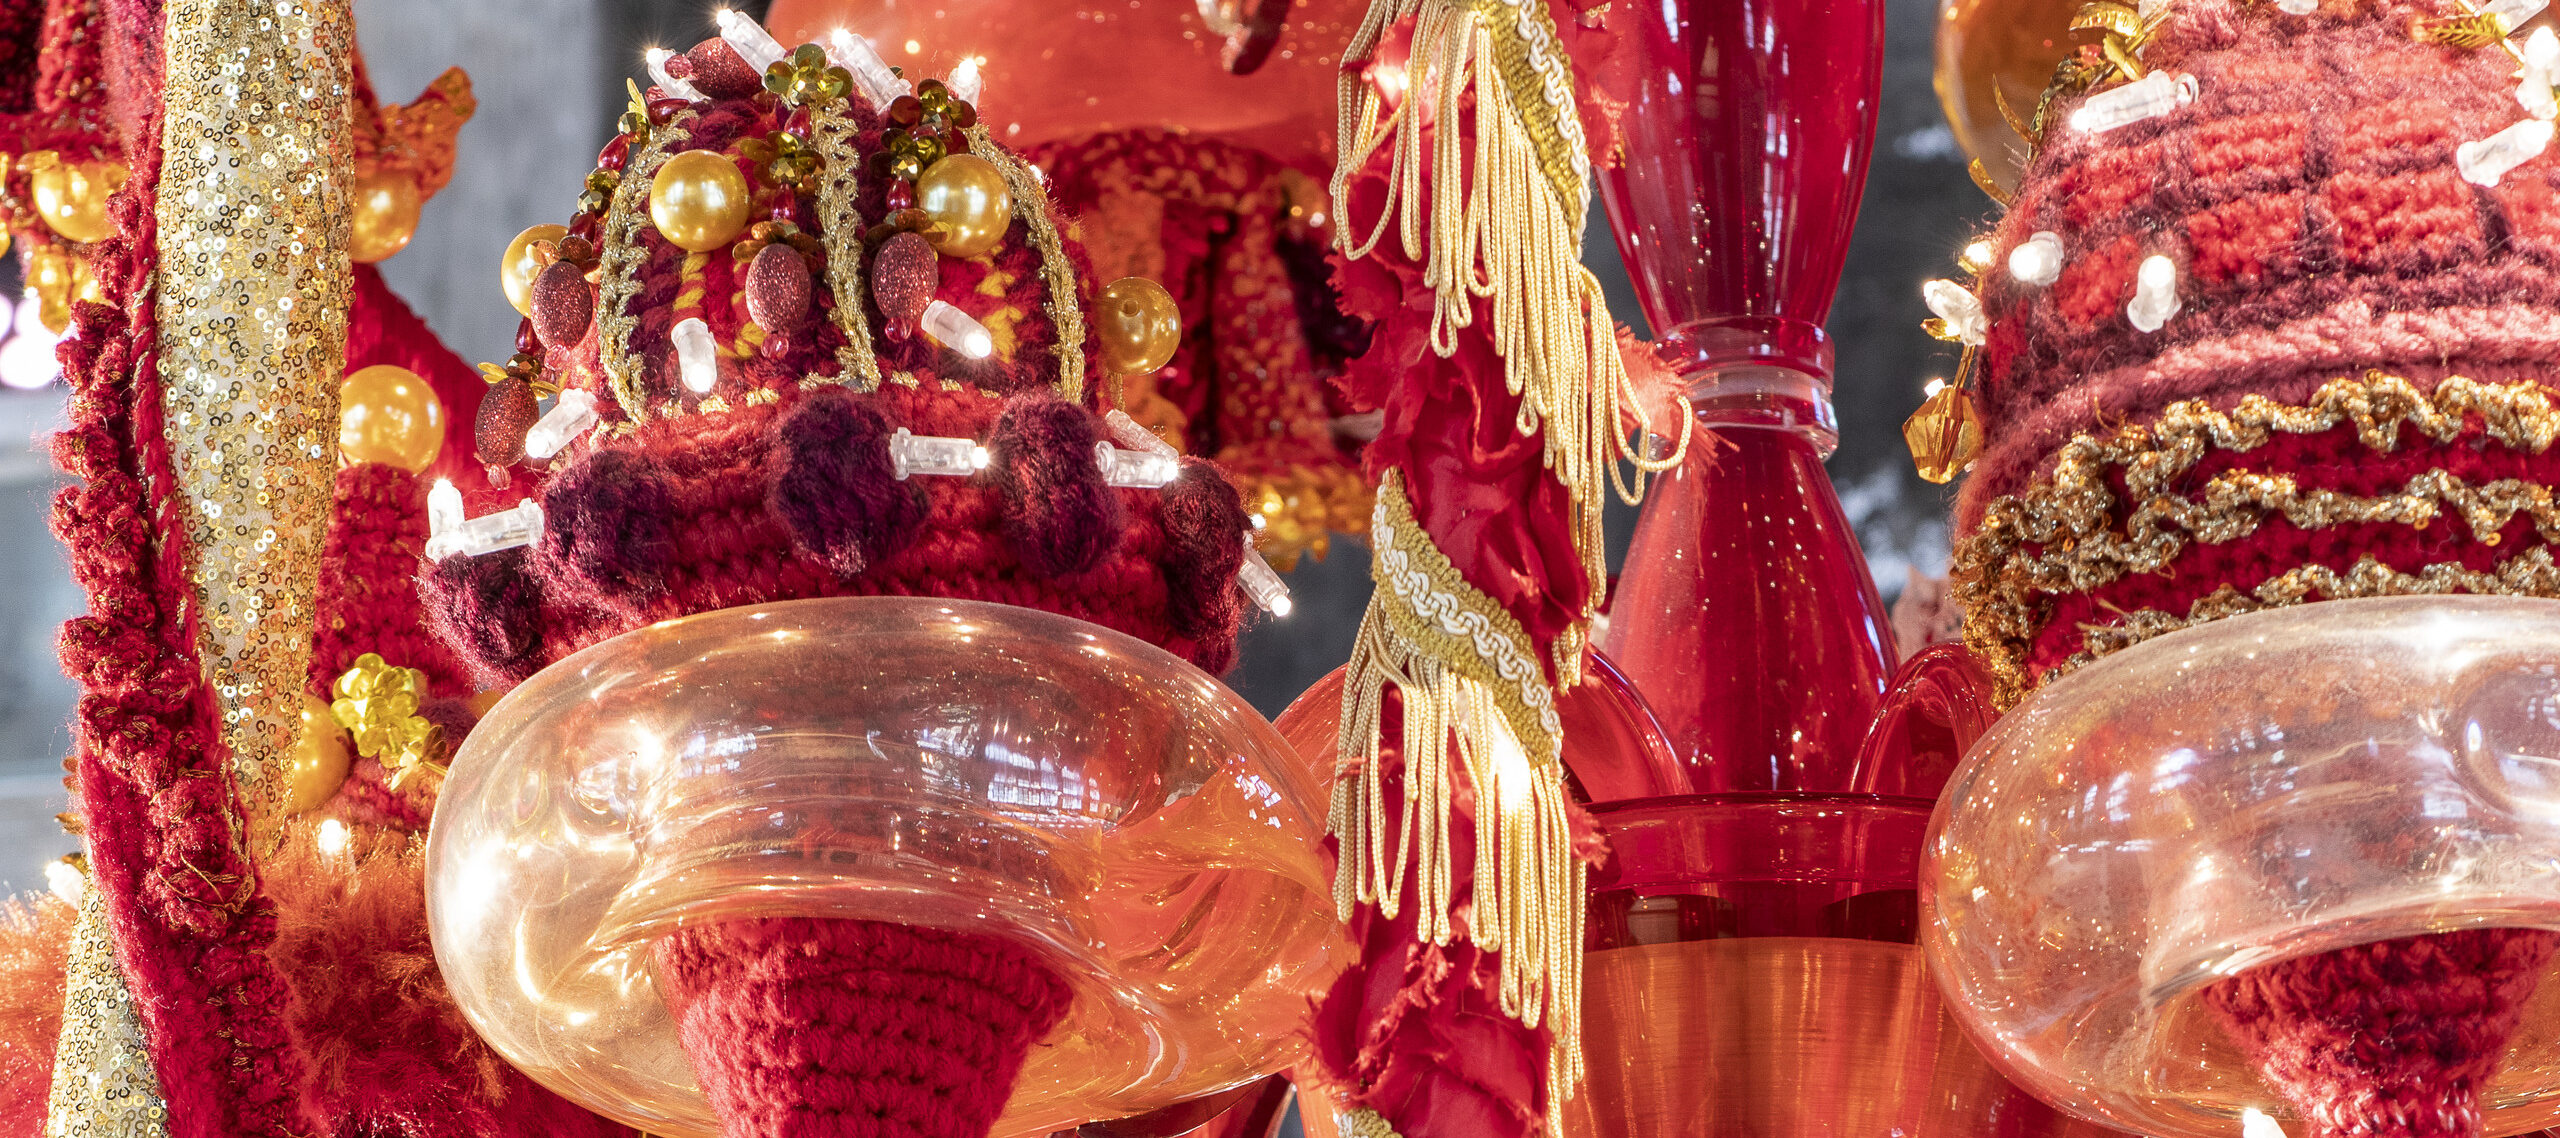 A color image of a detail of a chandelier made of red, orange, and yellow Murano glass, wool yarn, polyester fabrics, and LED lighting.